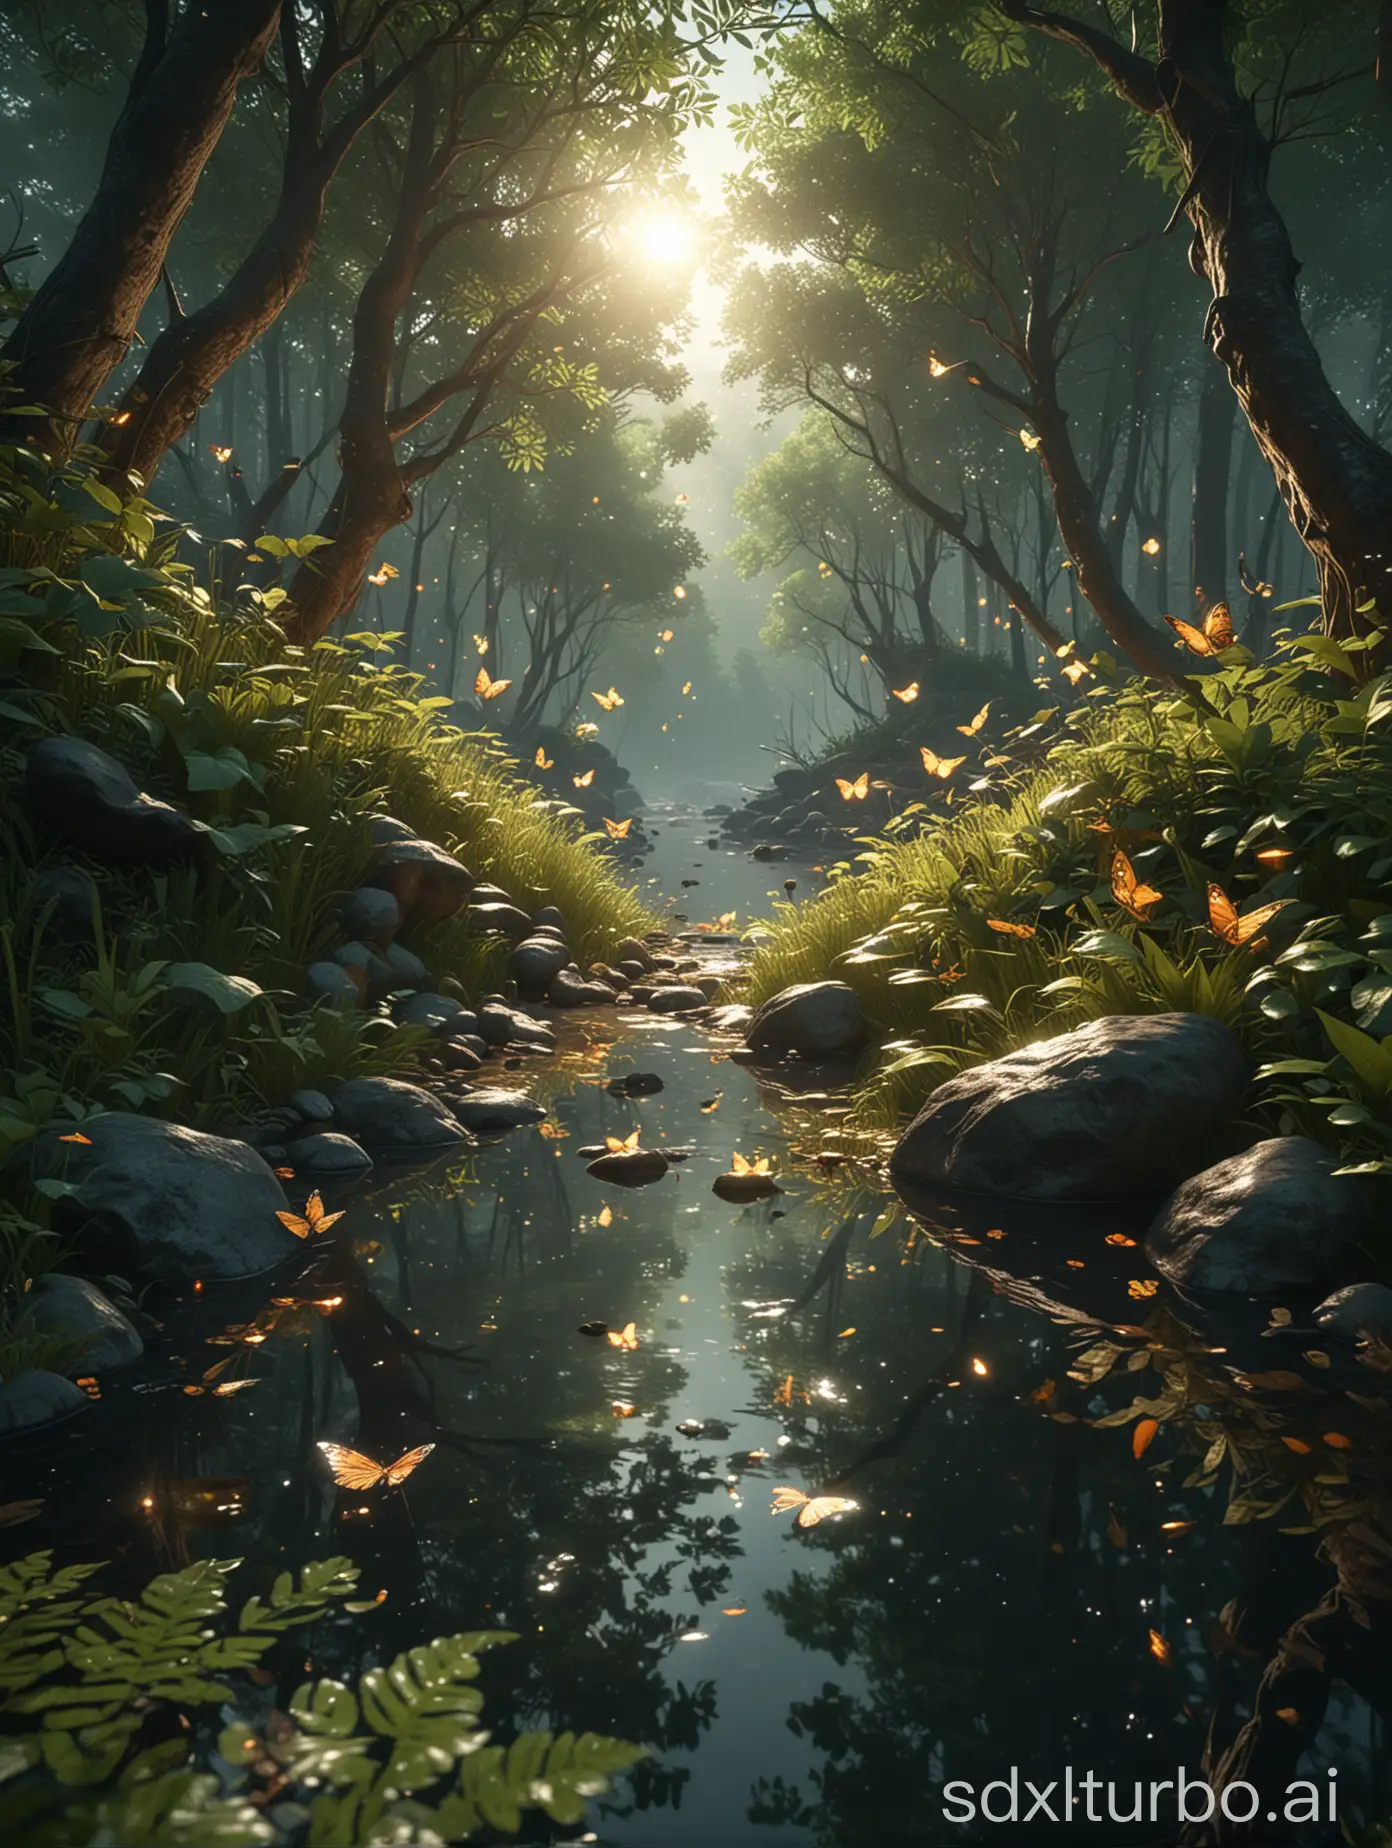 Enchanting-Forest-Scene-with-Glowing-Mushrooms-and-Fireflies